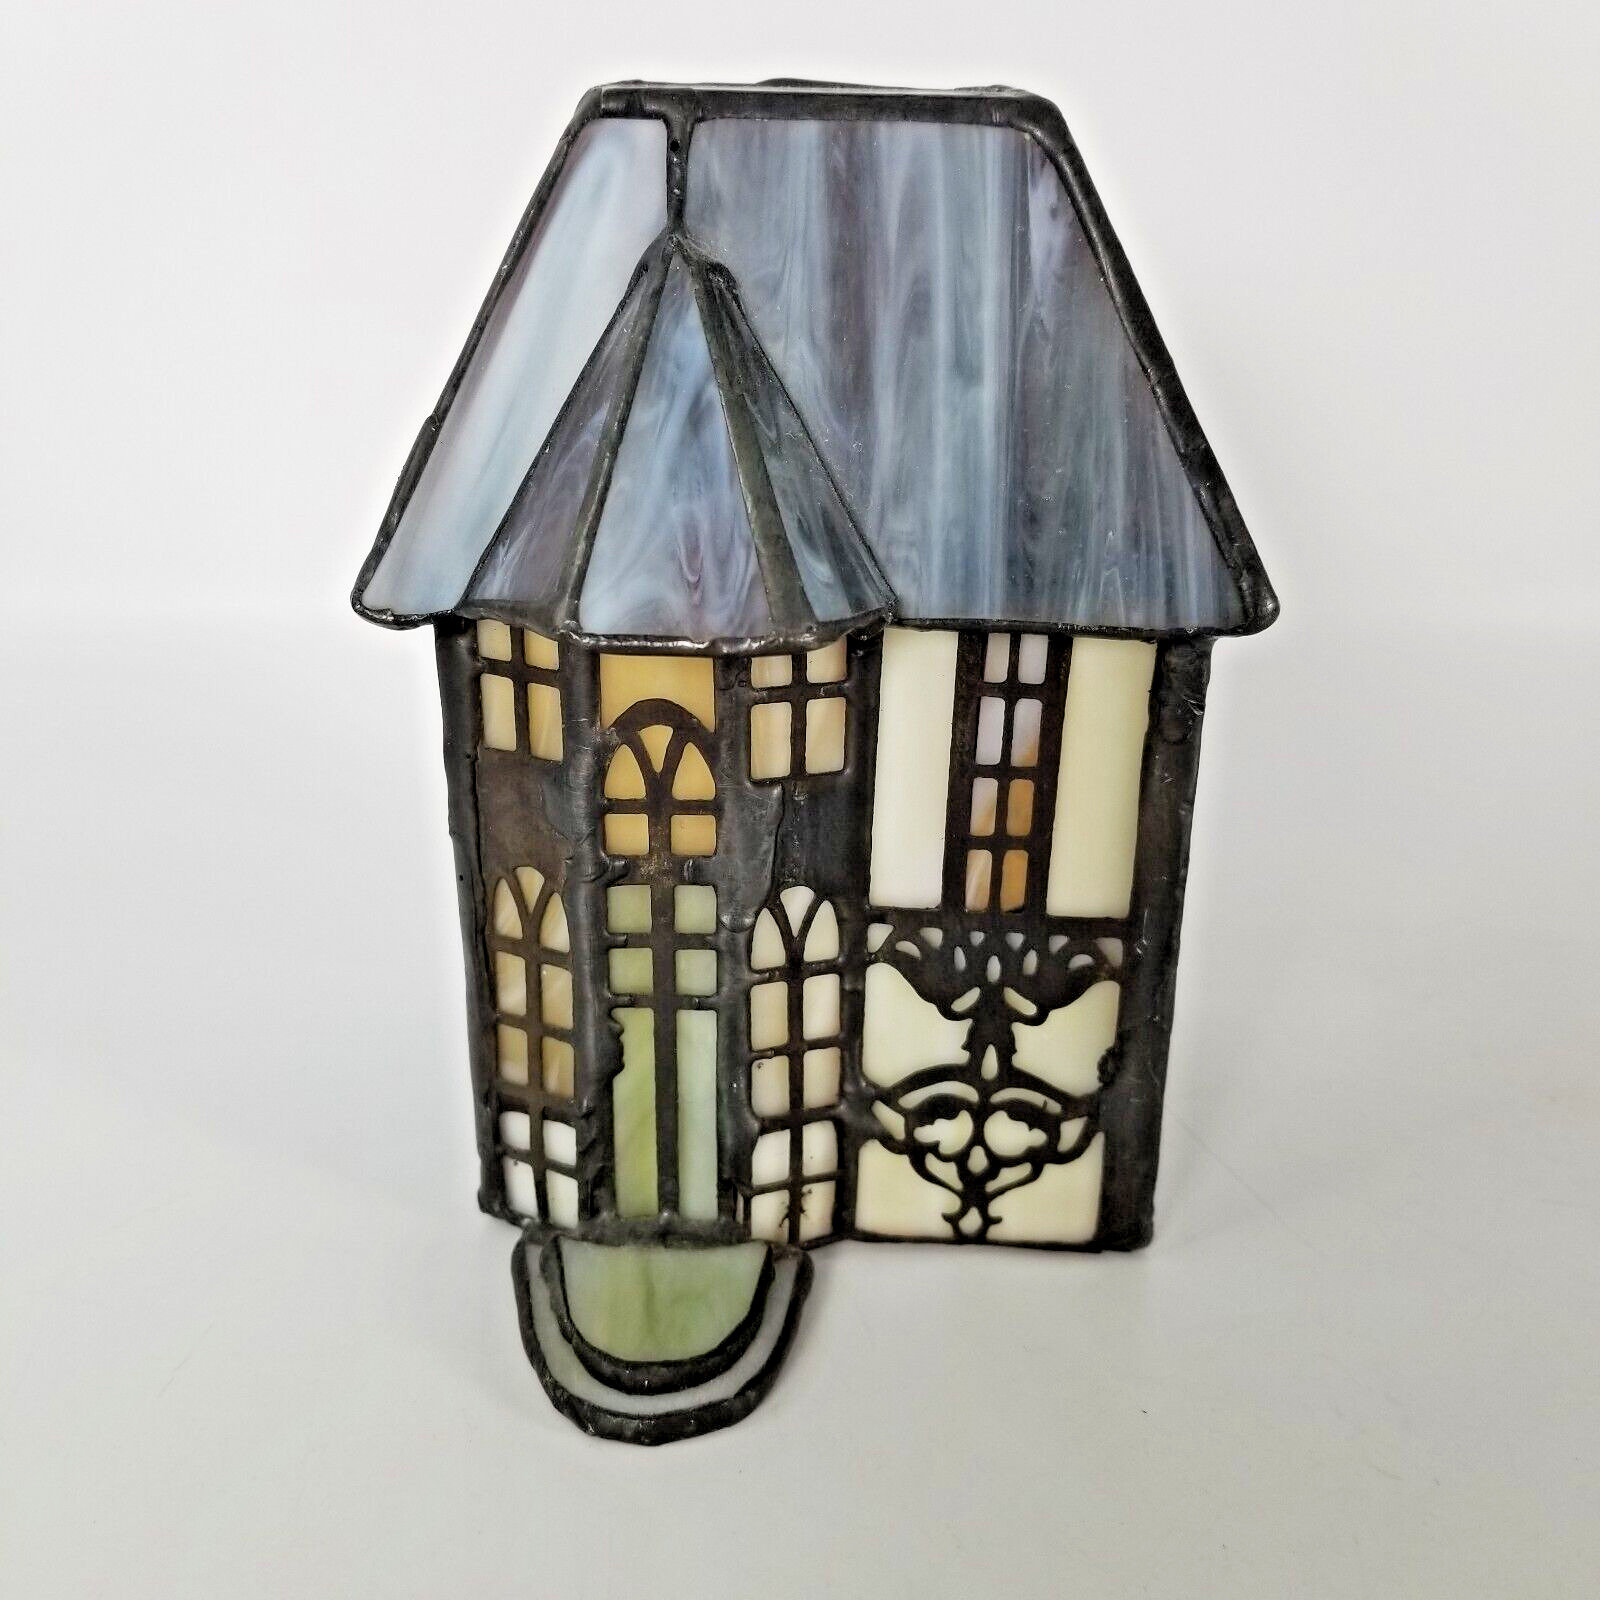 RARE Vintage Stained Glass Christmas Village House Night Light